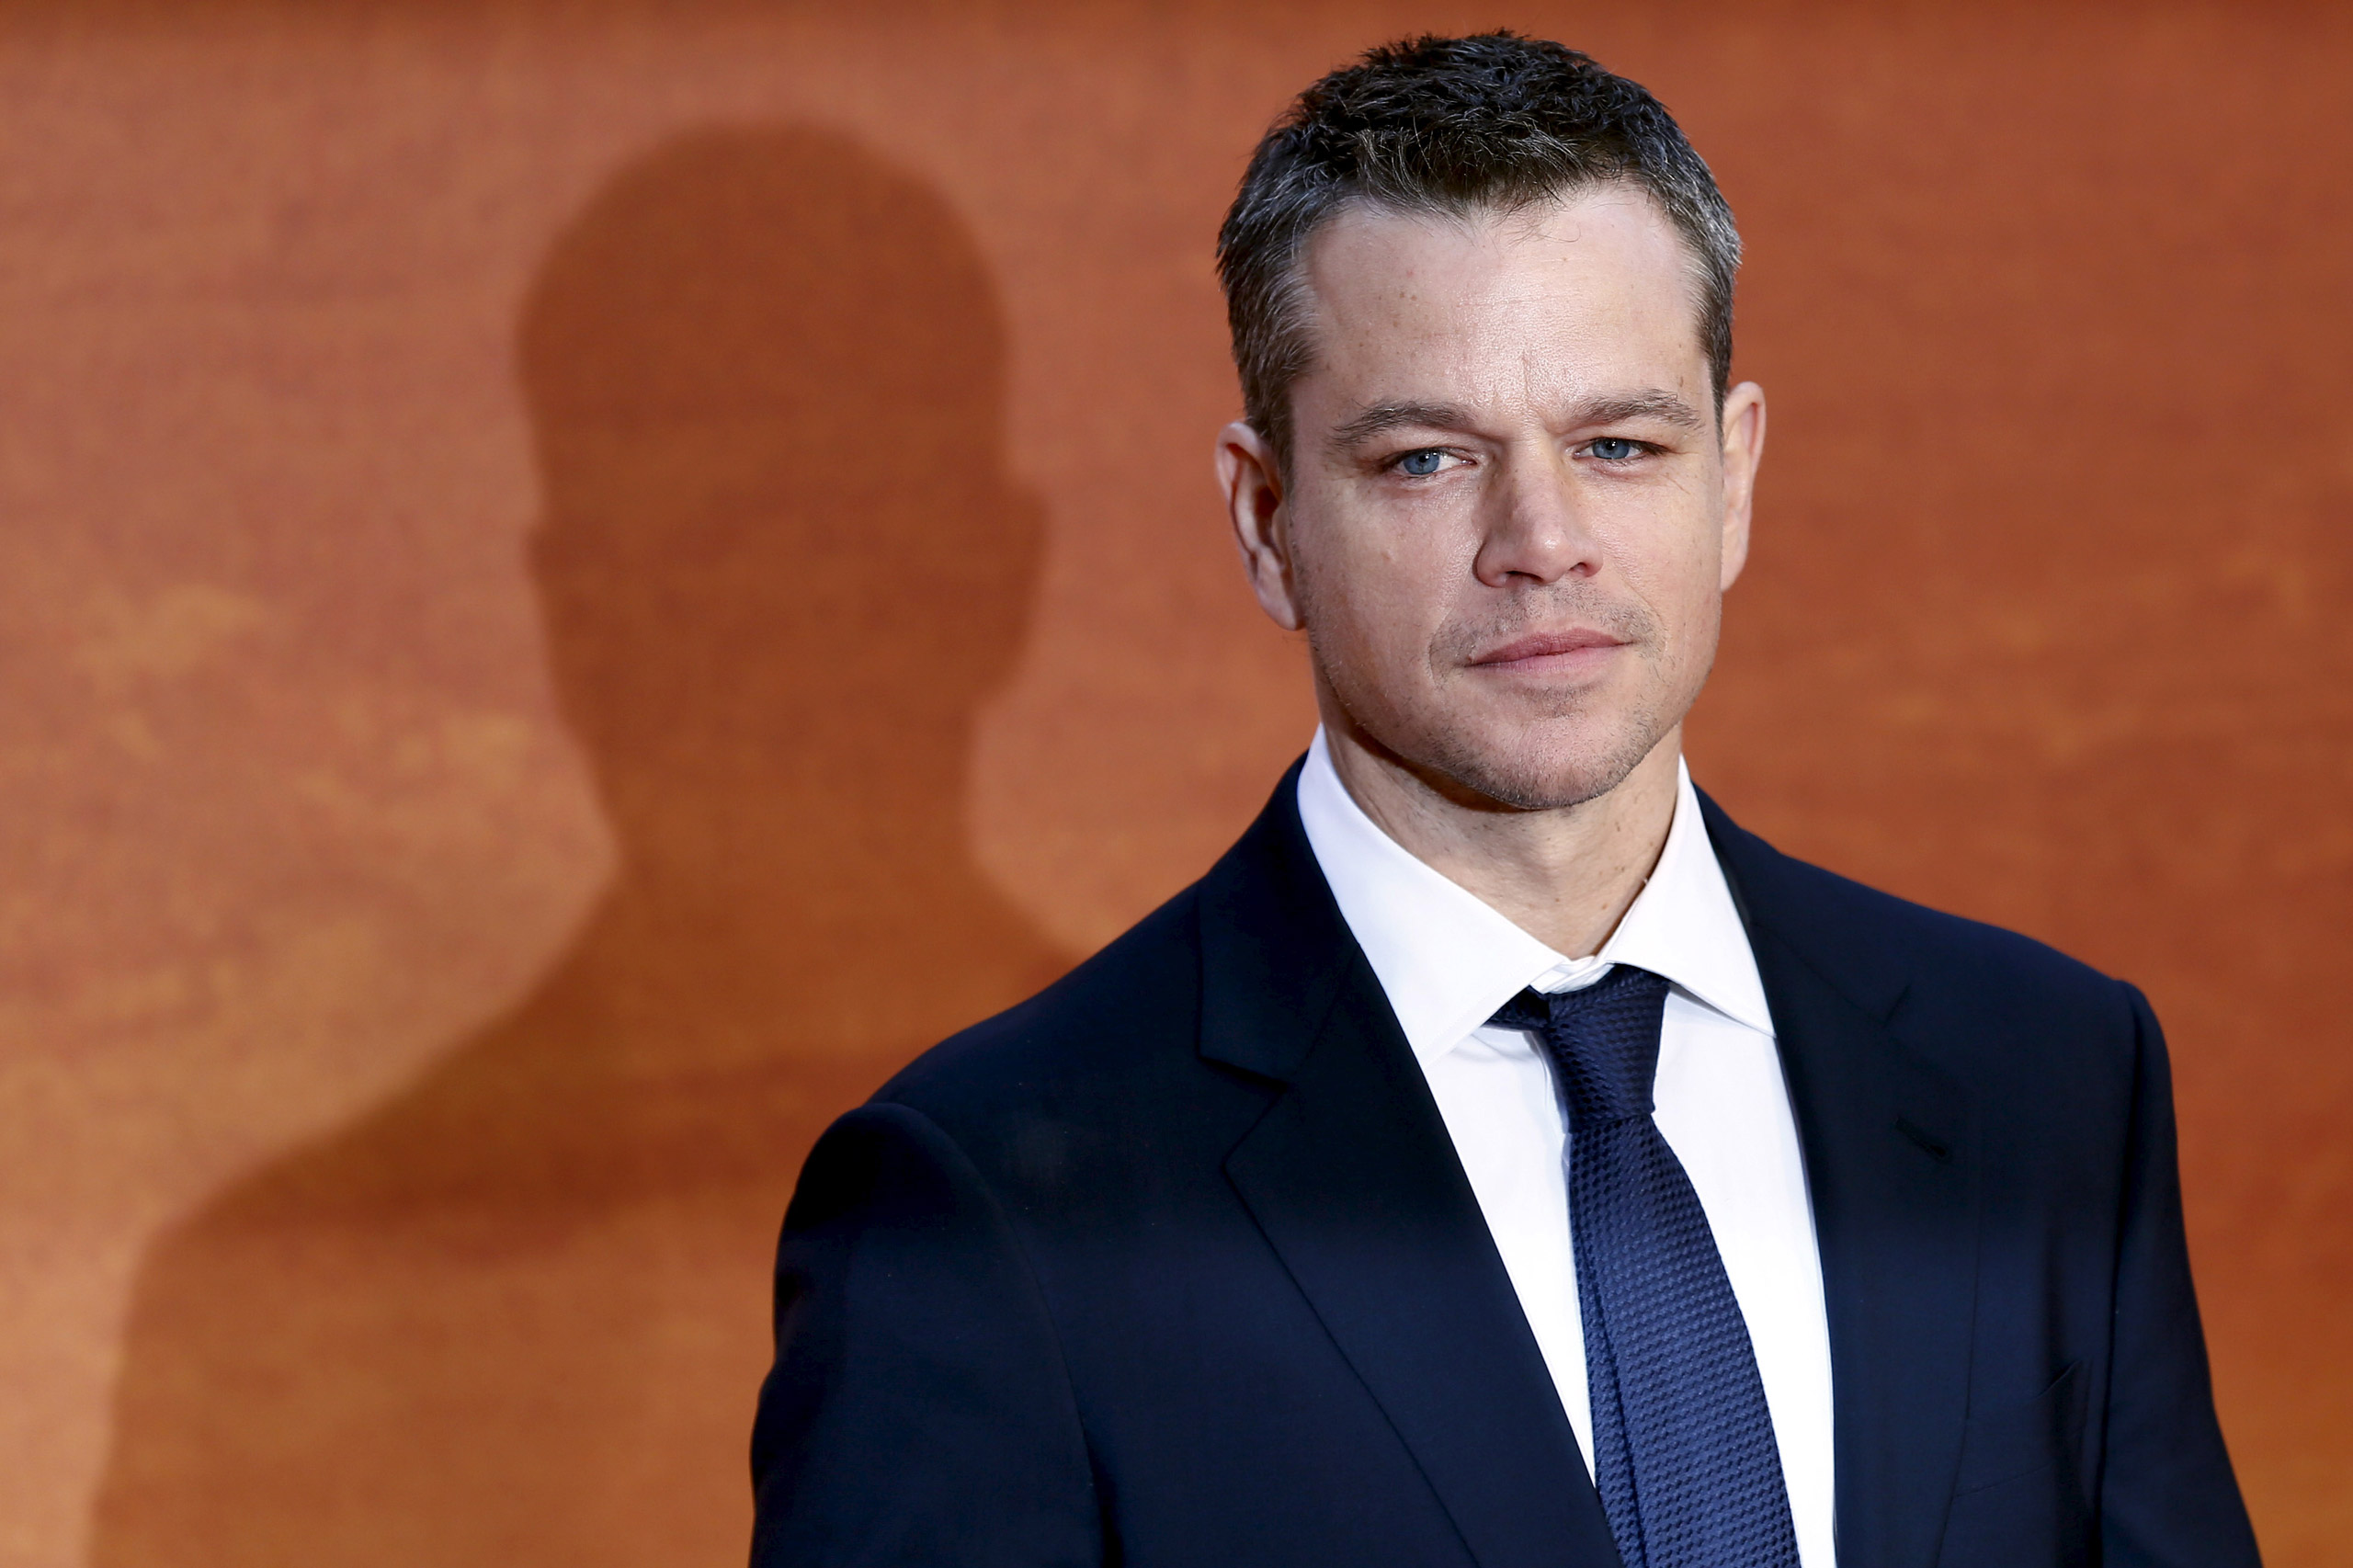 Matt Damon arrives for the UK premiere of "The Martian" at Leicester Square in London on Sept. 24, 2015. (Stefan Wermuth—Reuters)